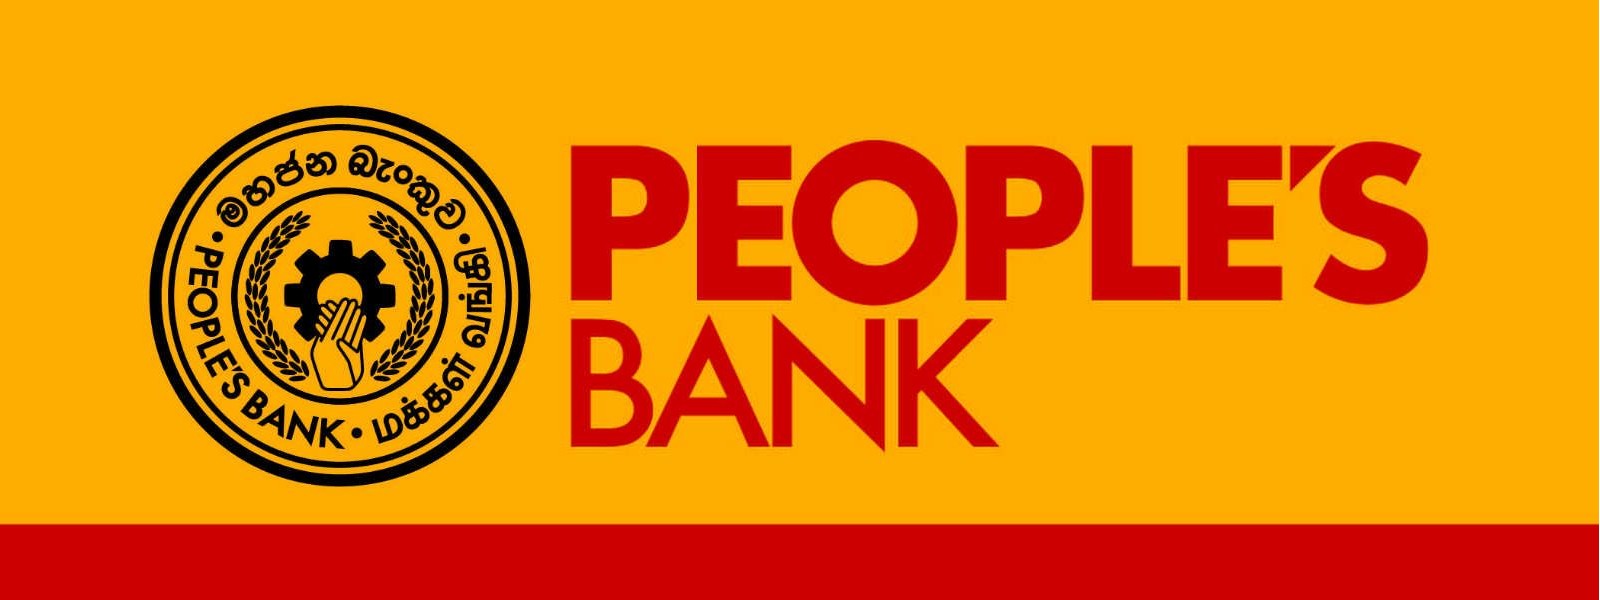 People’s Bank responds to Blacklisting by China, says bound to follow court order